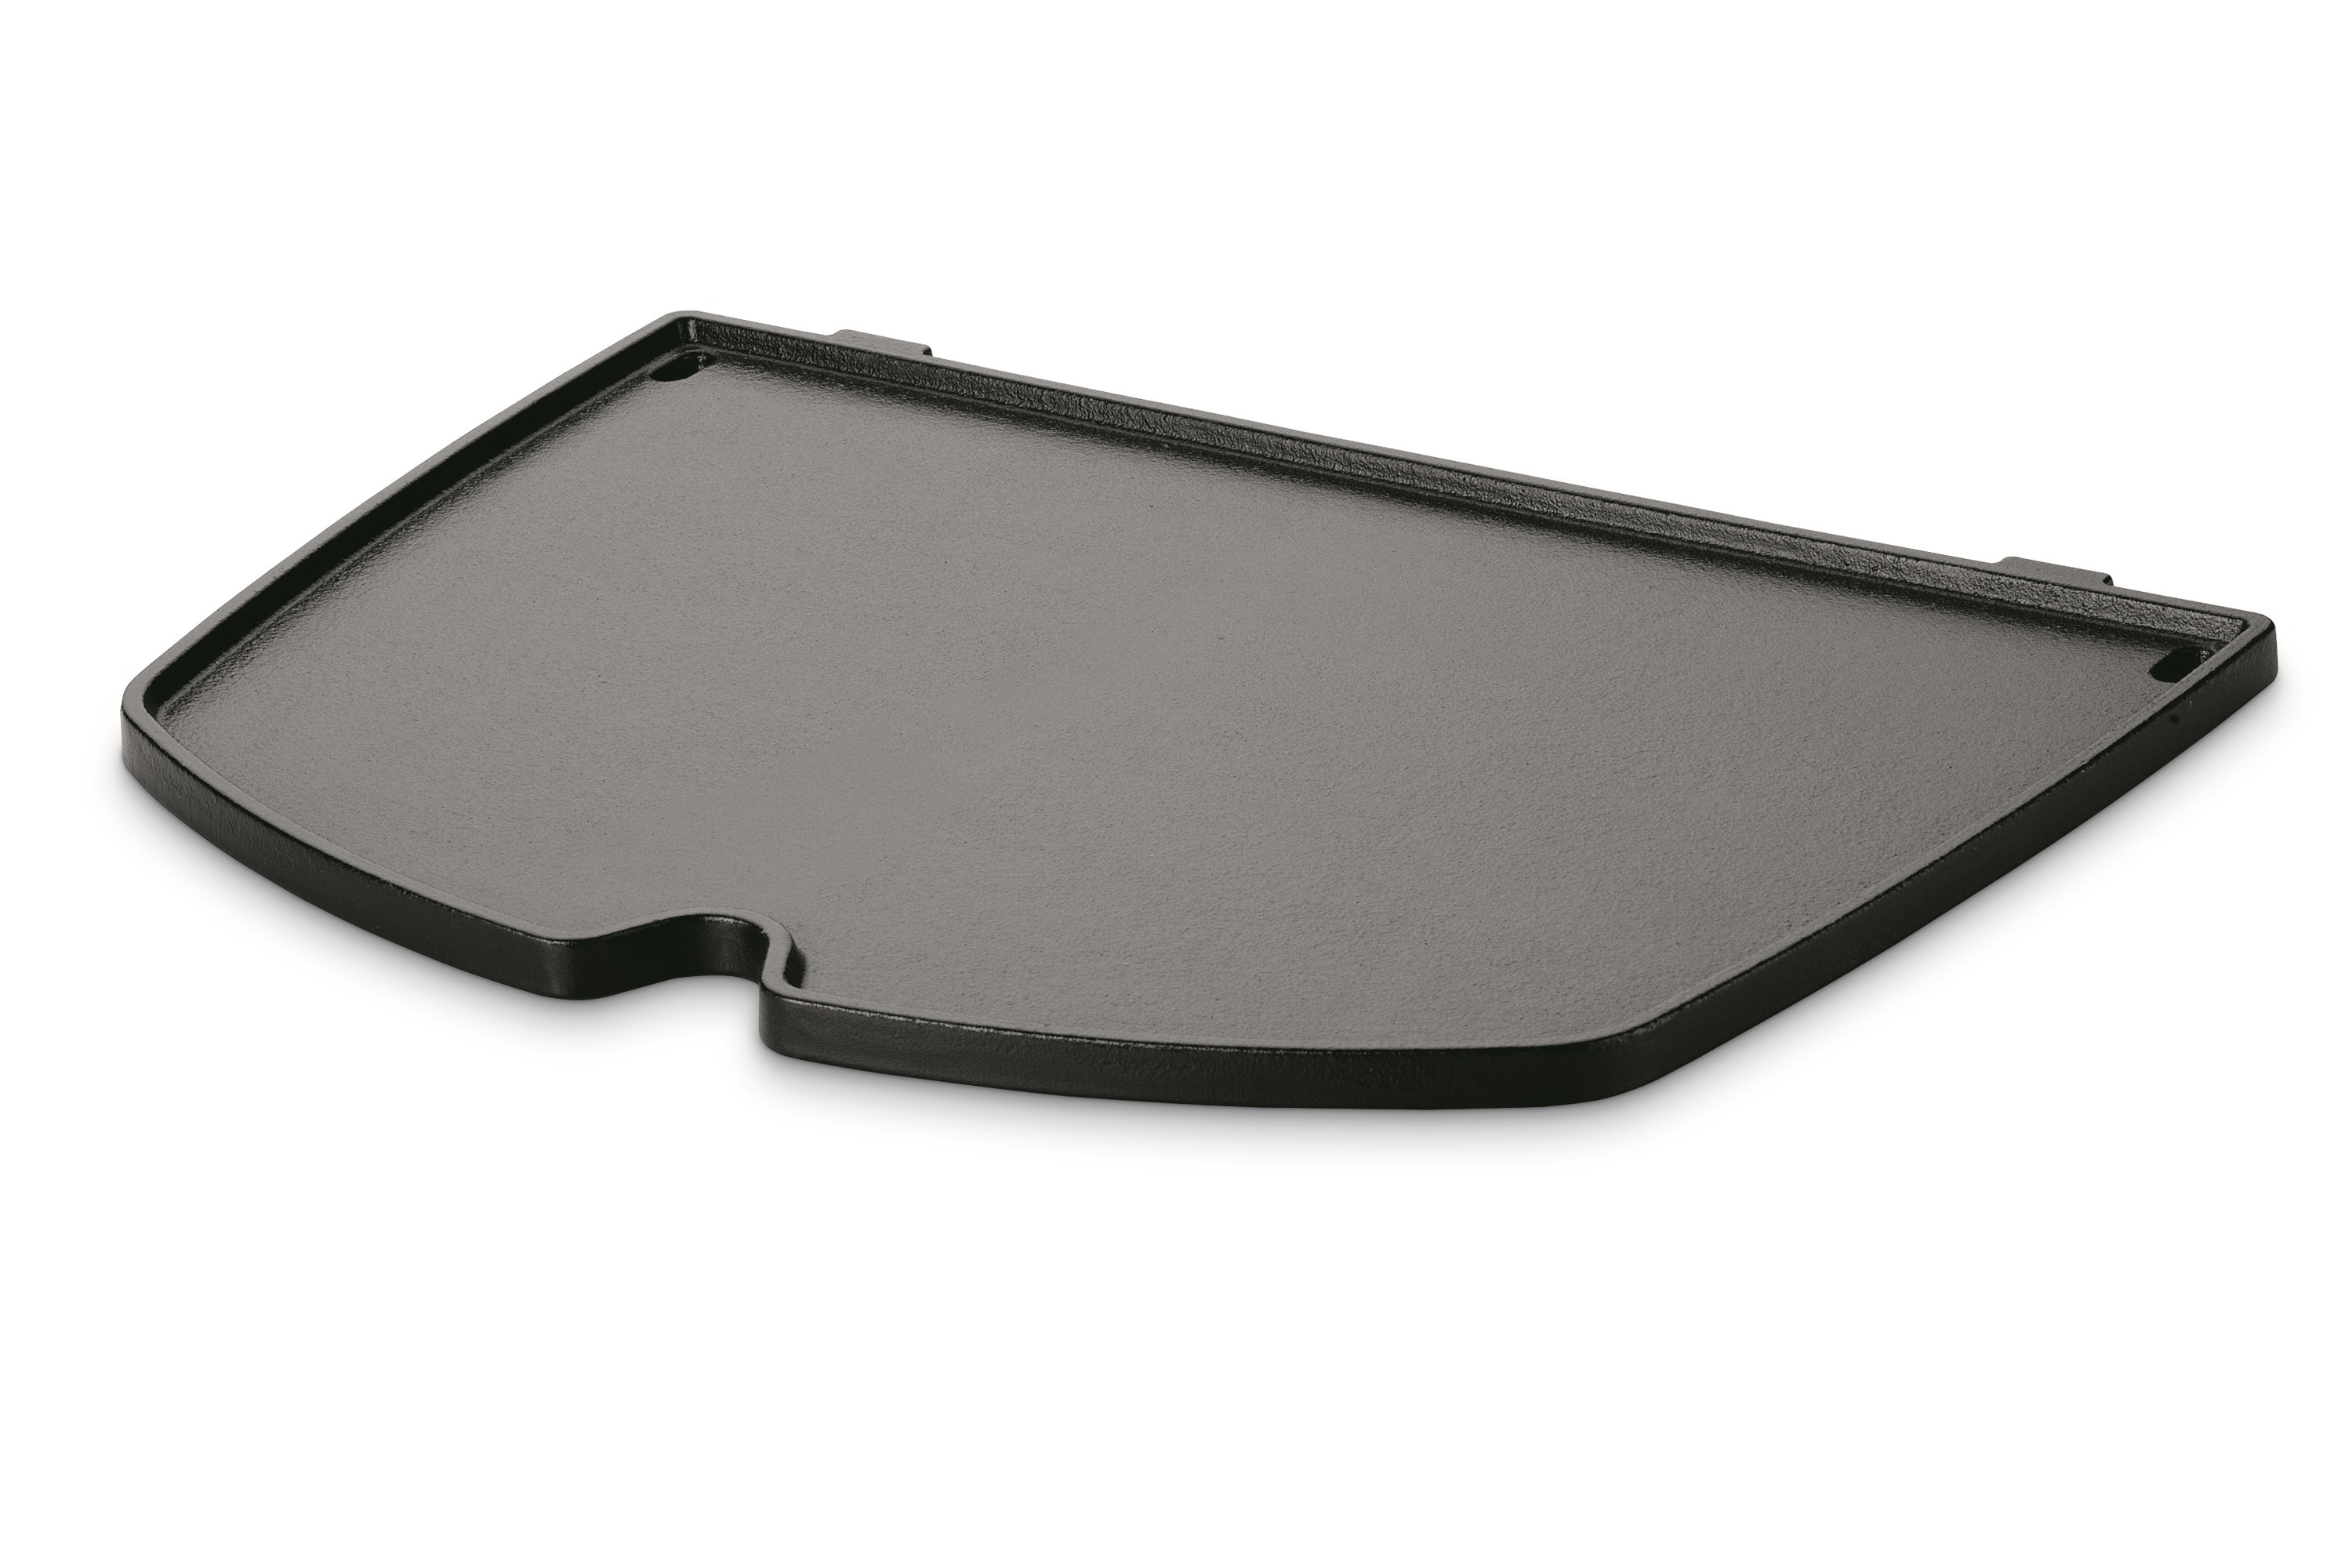 Ninja Grill Cookware: No Handle Grill Pan, Aluminum, Fits OG800 & OG900  Series, Cook Beyond Grilling, Click-In Fit